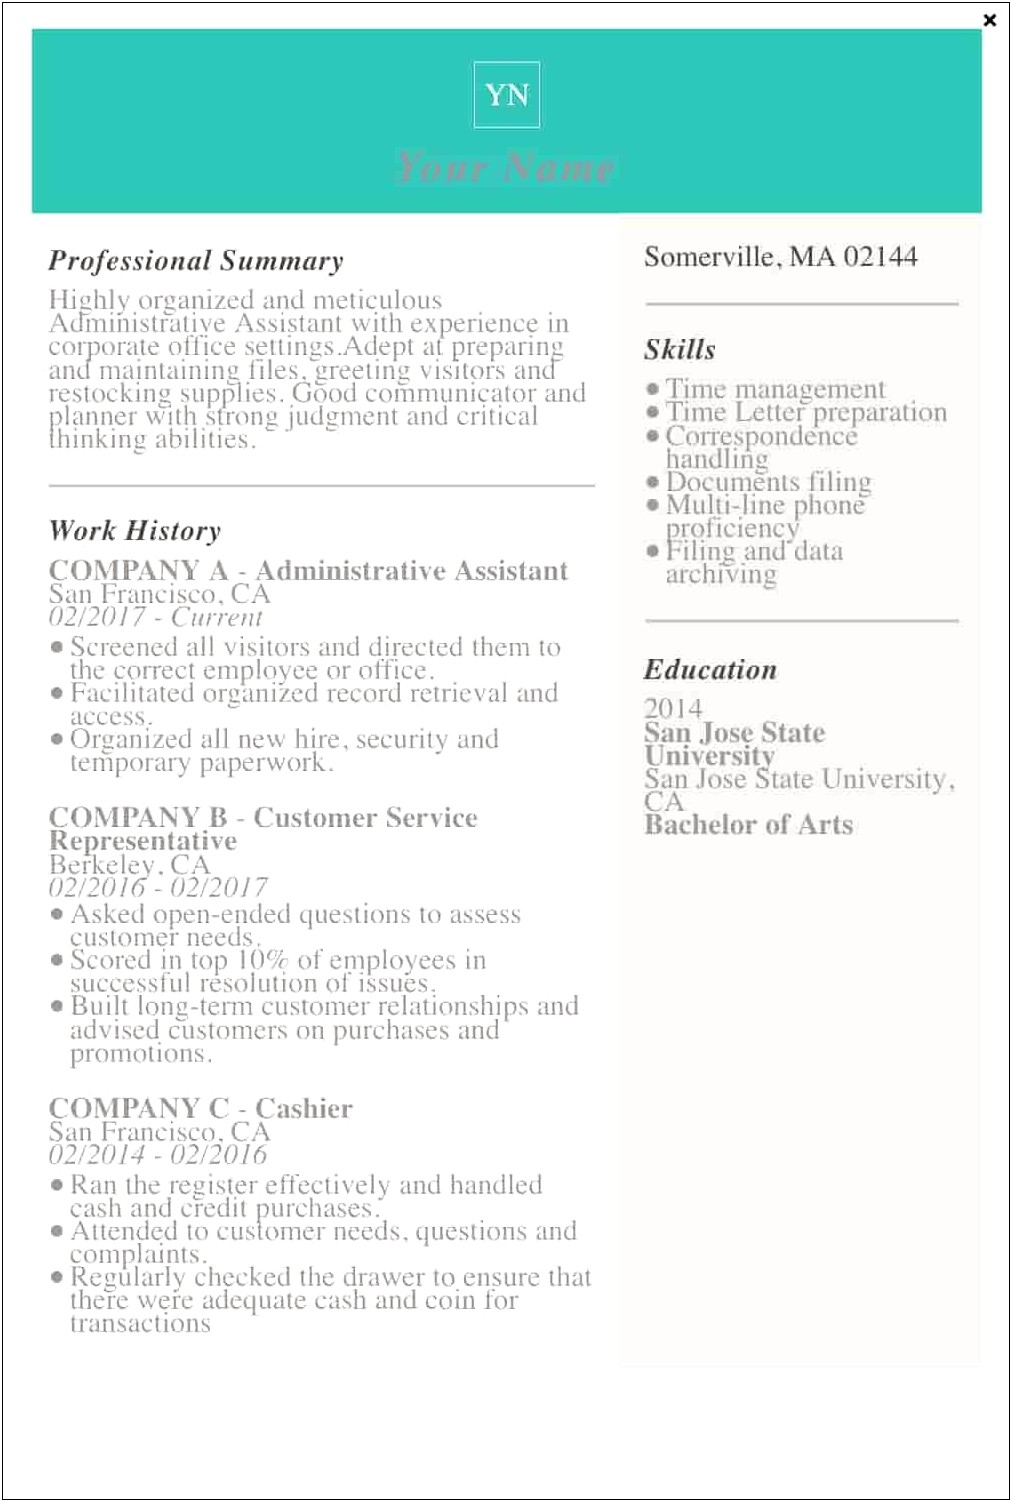 Great Resume Job Descprition Law Library Supervisor